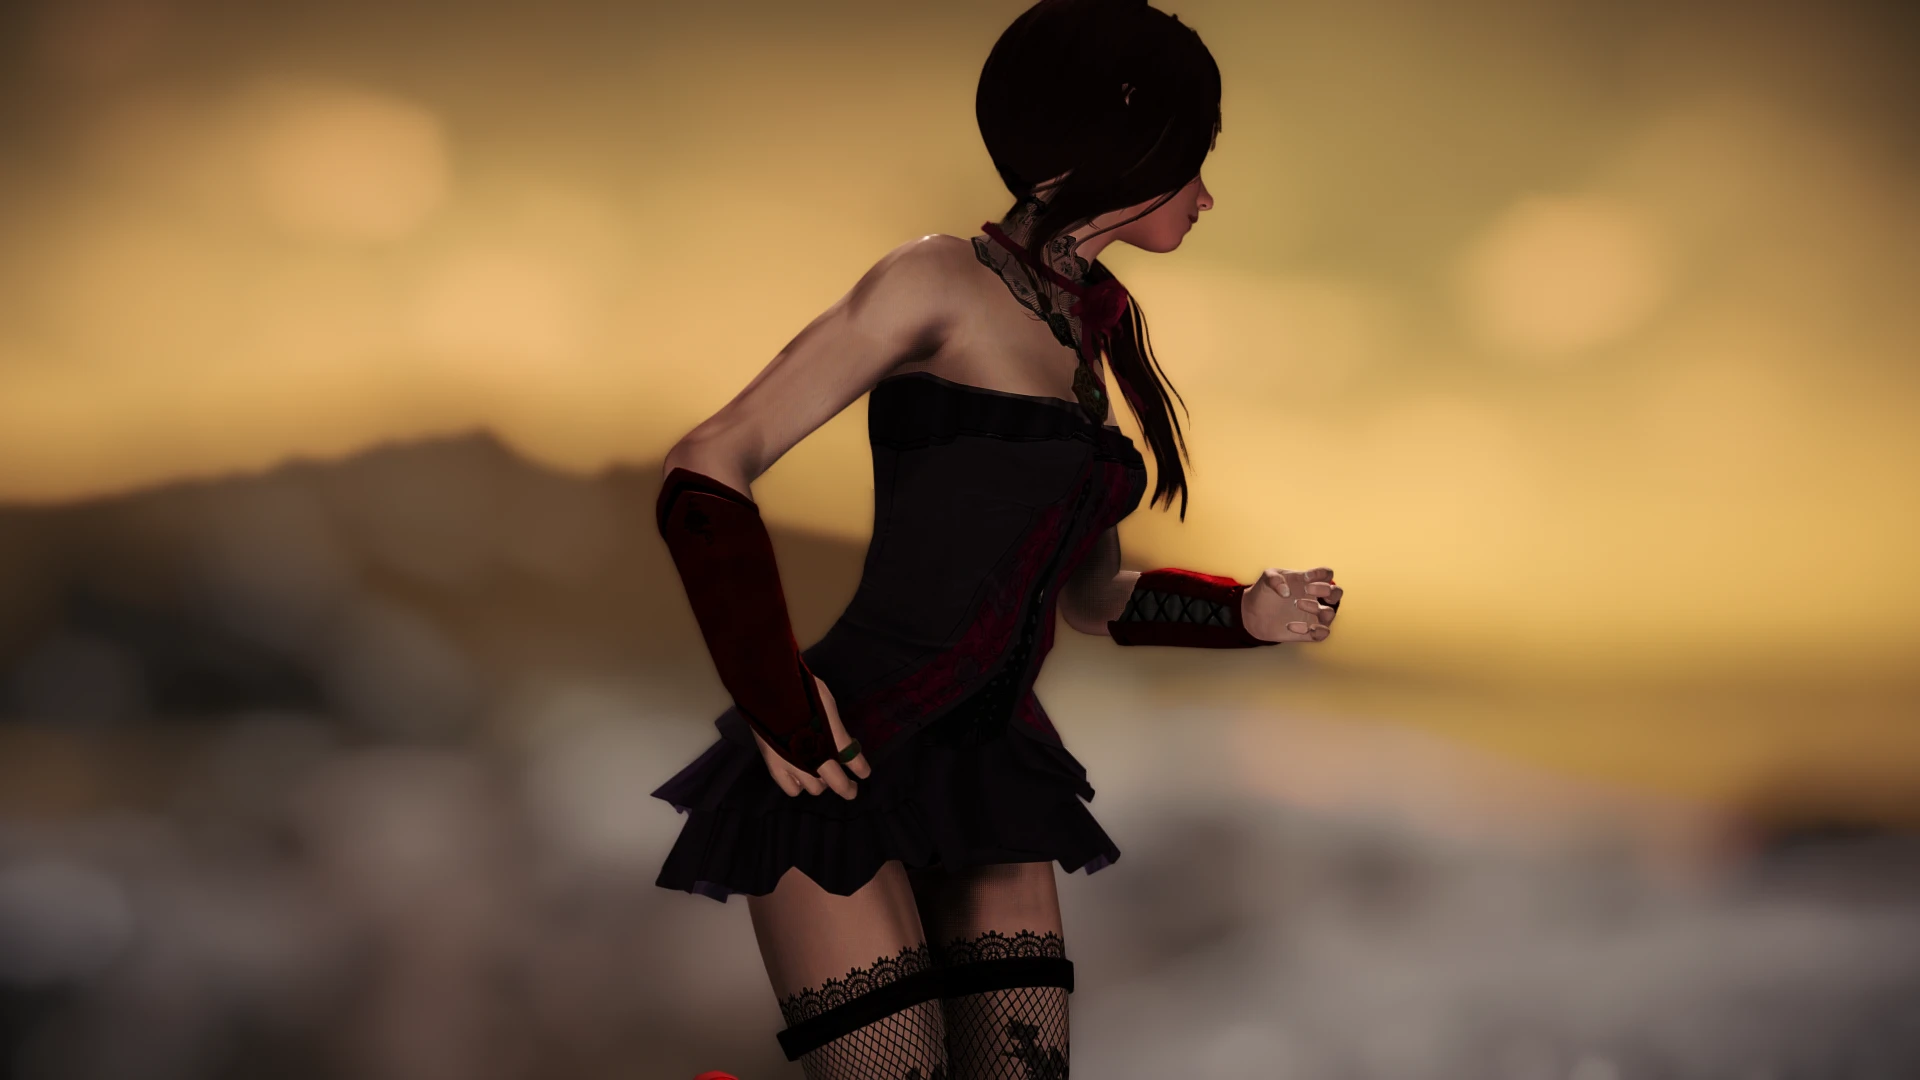 fitgirl skyrim special edition 1.5.39 update download